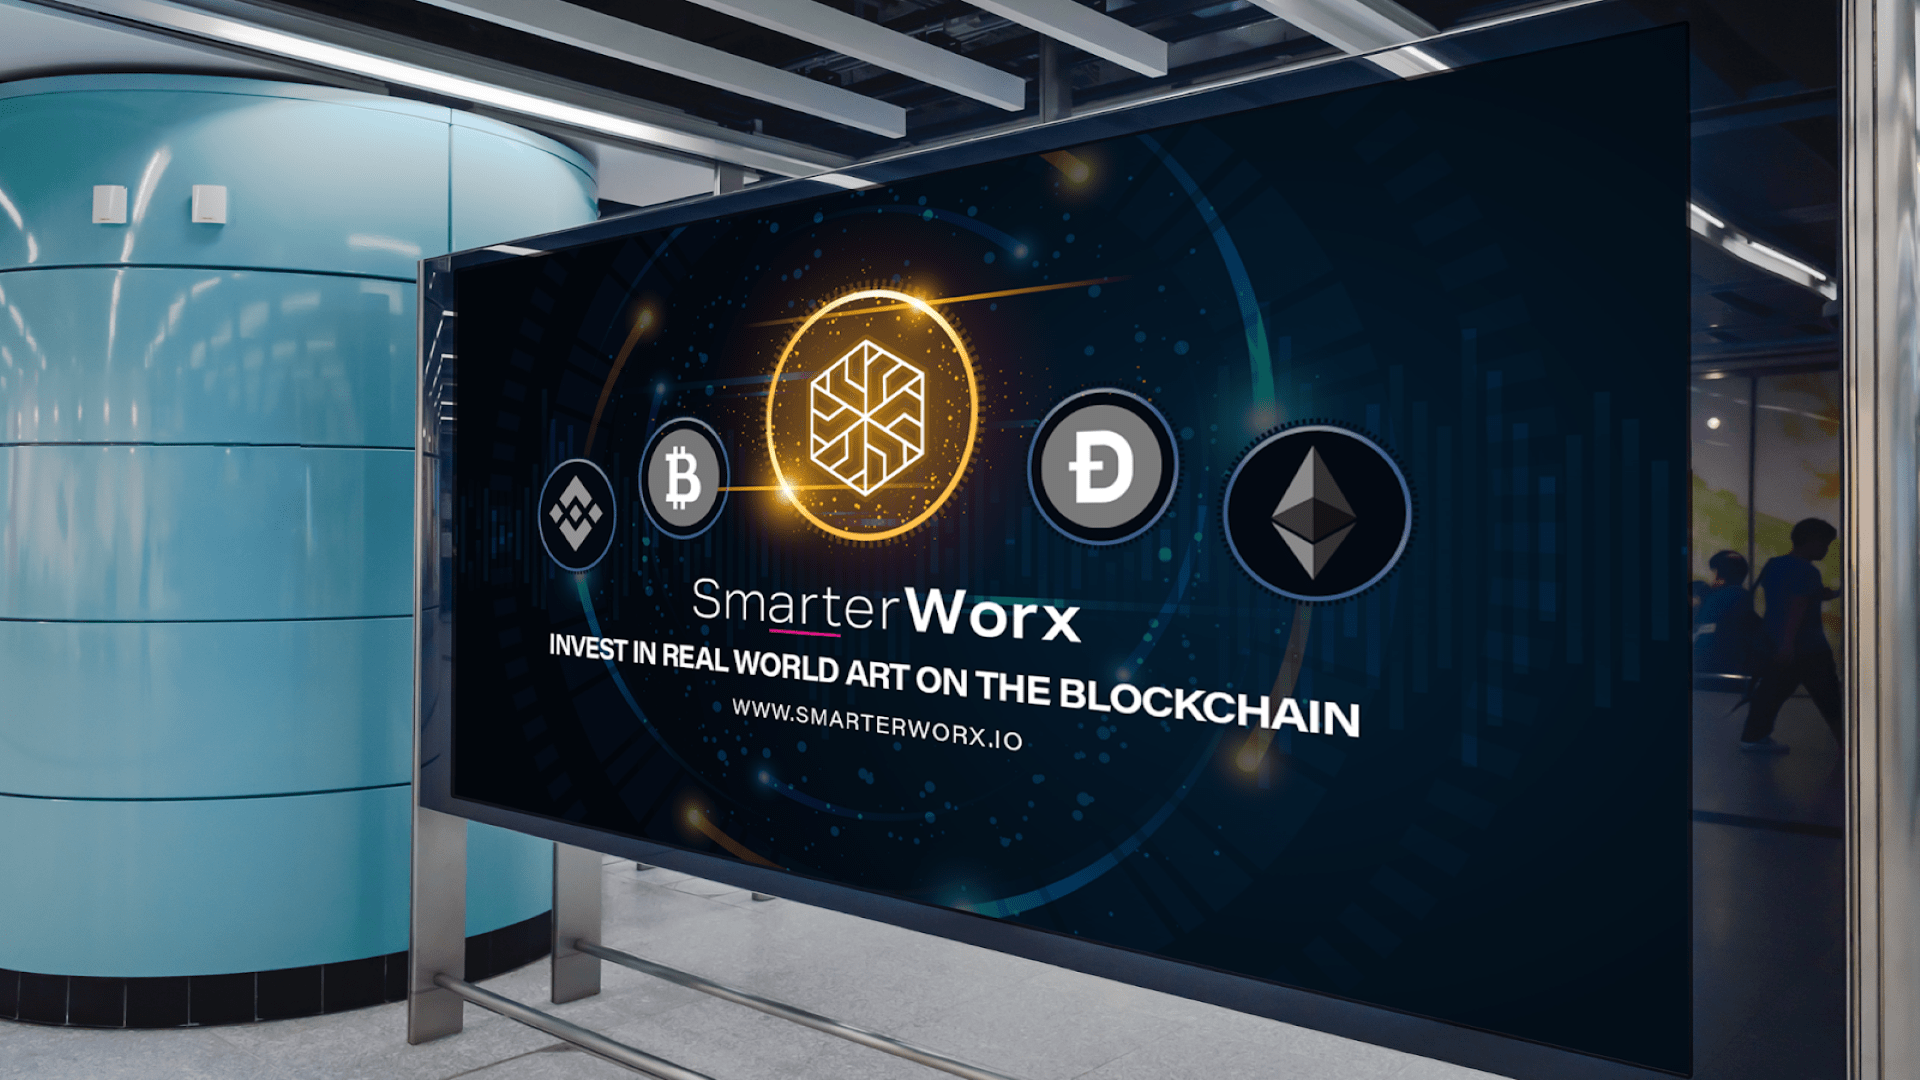 SmarterWorx Is Your Chance If You Missed Binance Coin or Shiba Inu Early On